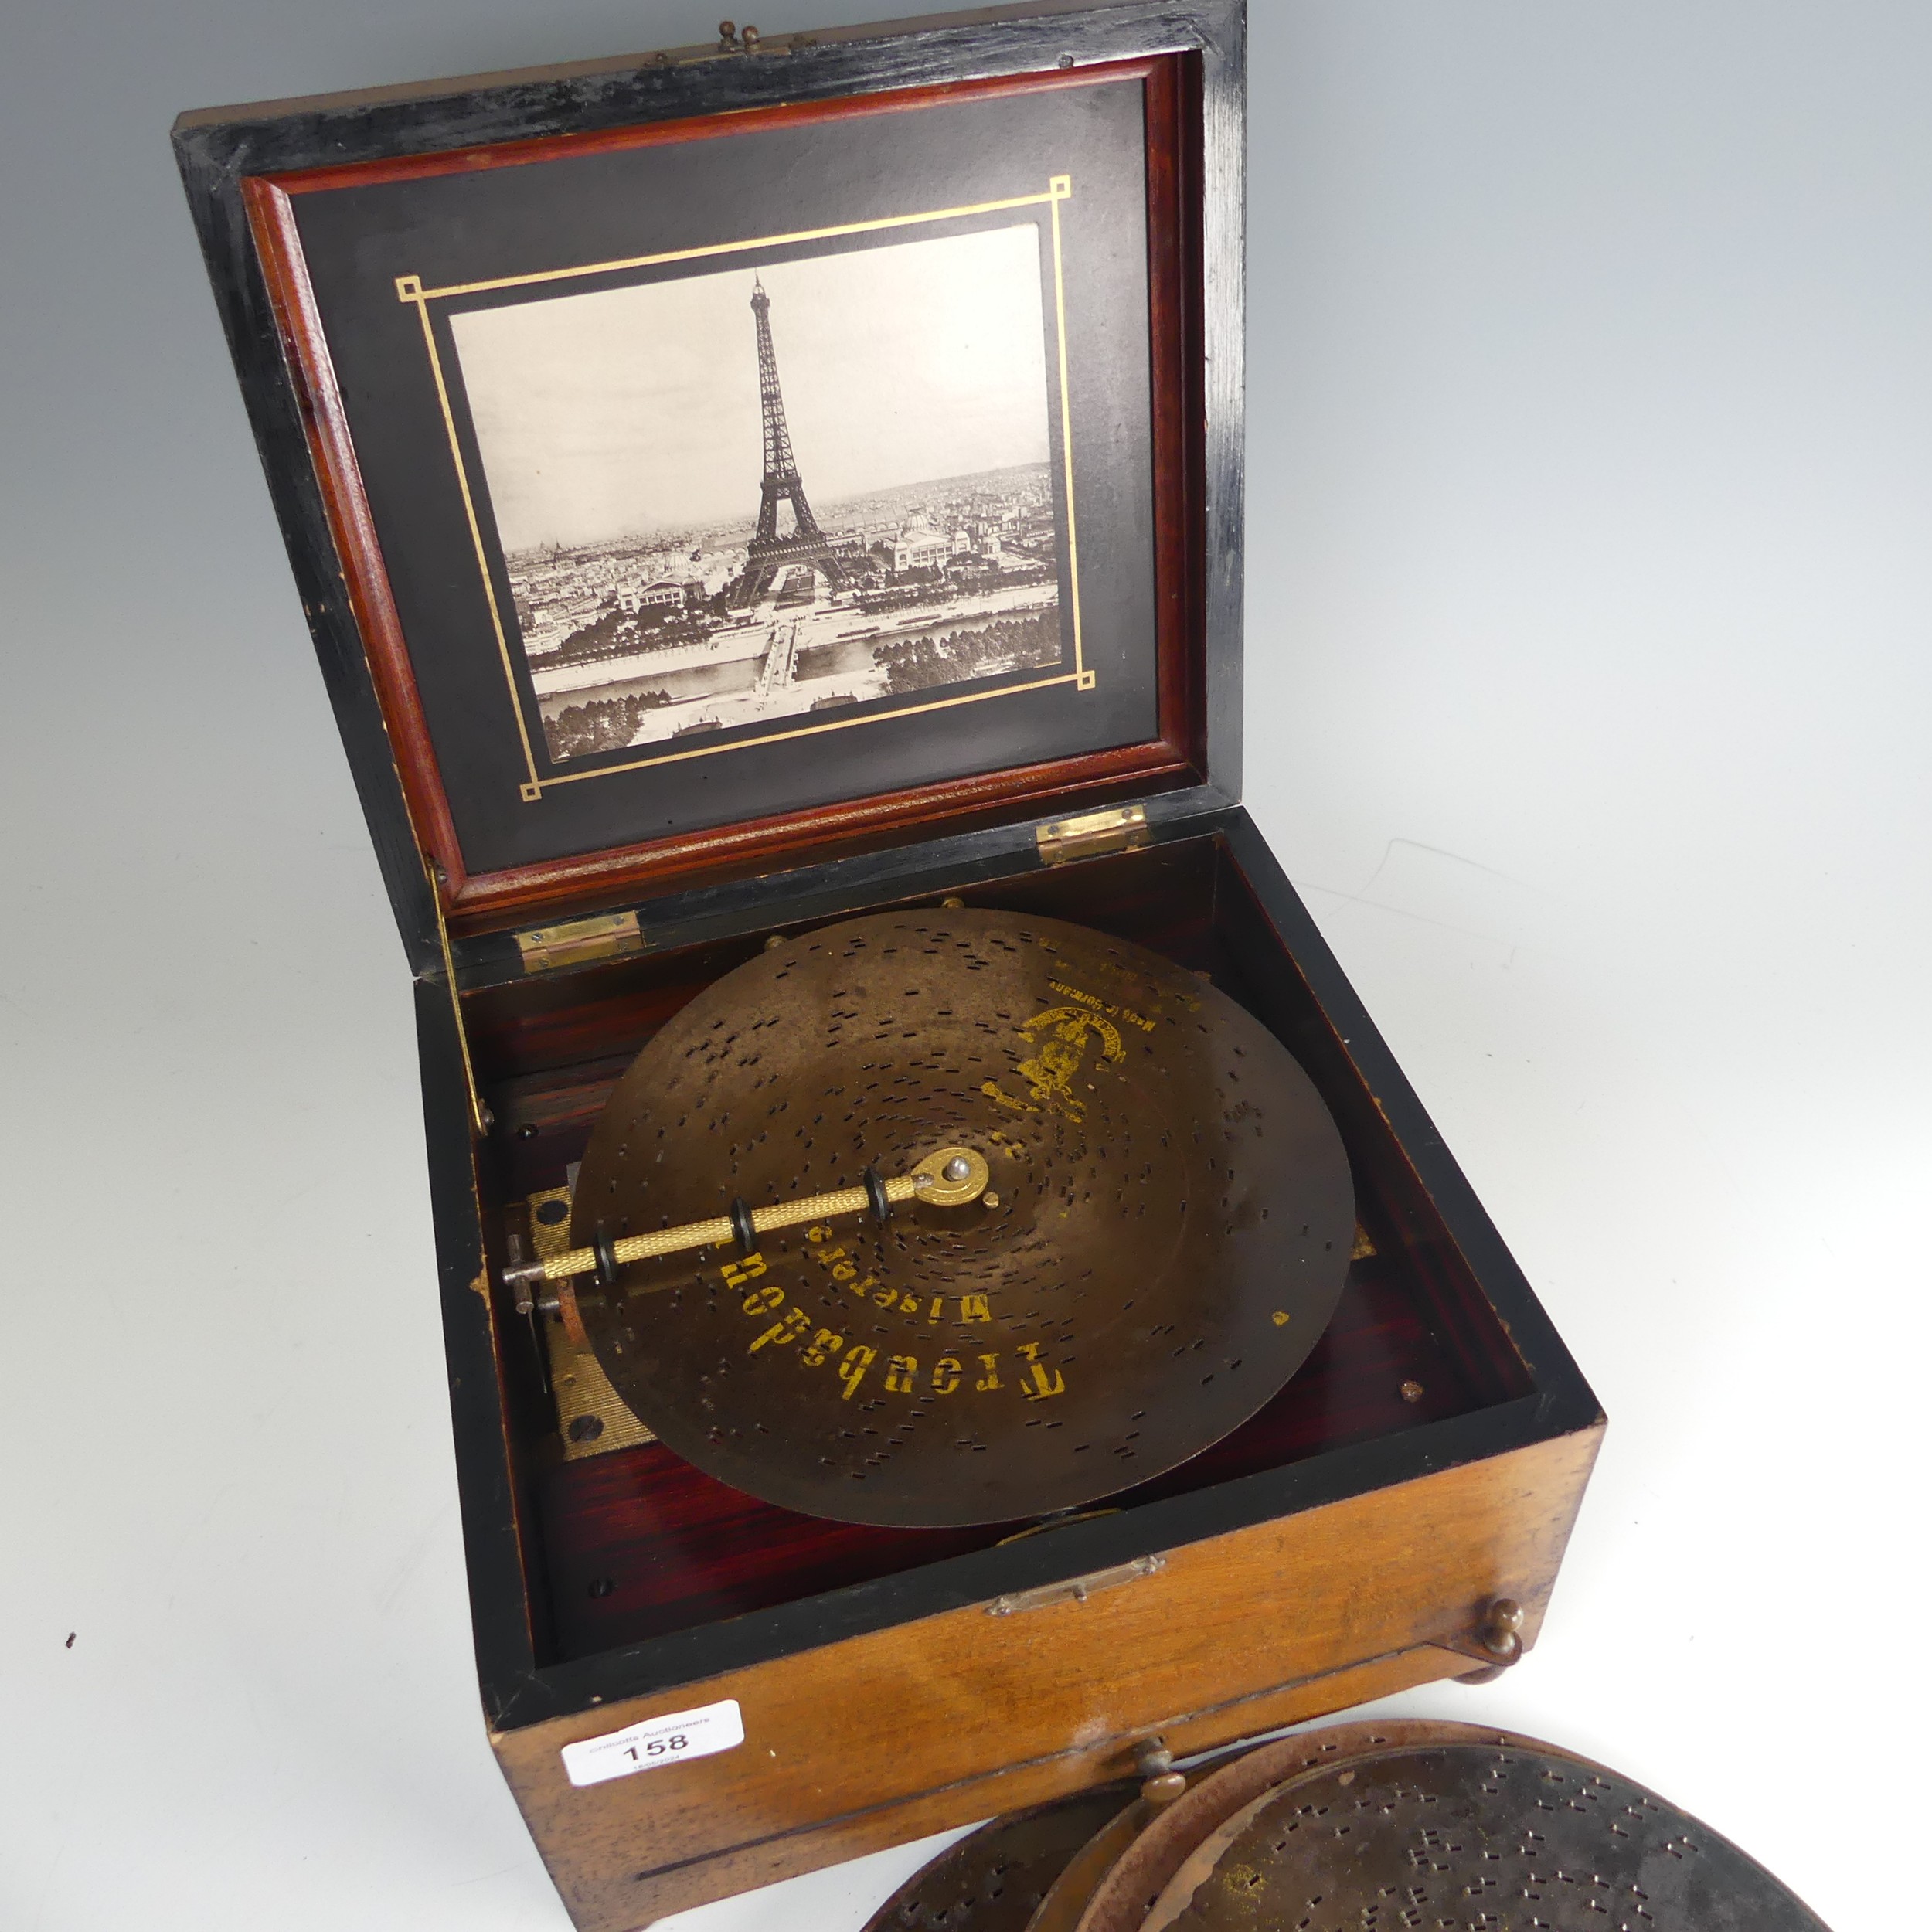 A late 19th century walnut cased Polyphon, with decorative hinged lid, the inside lid with